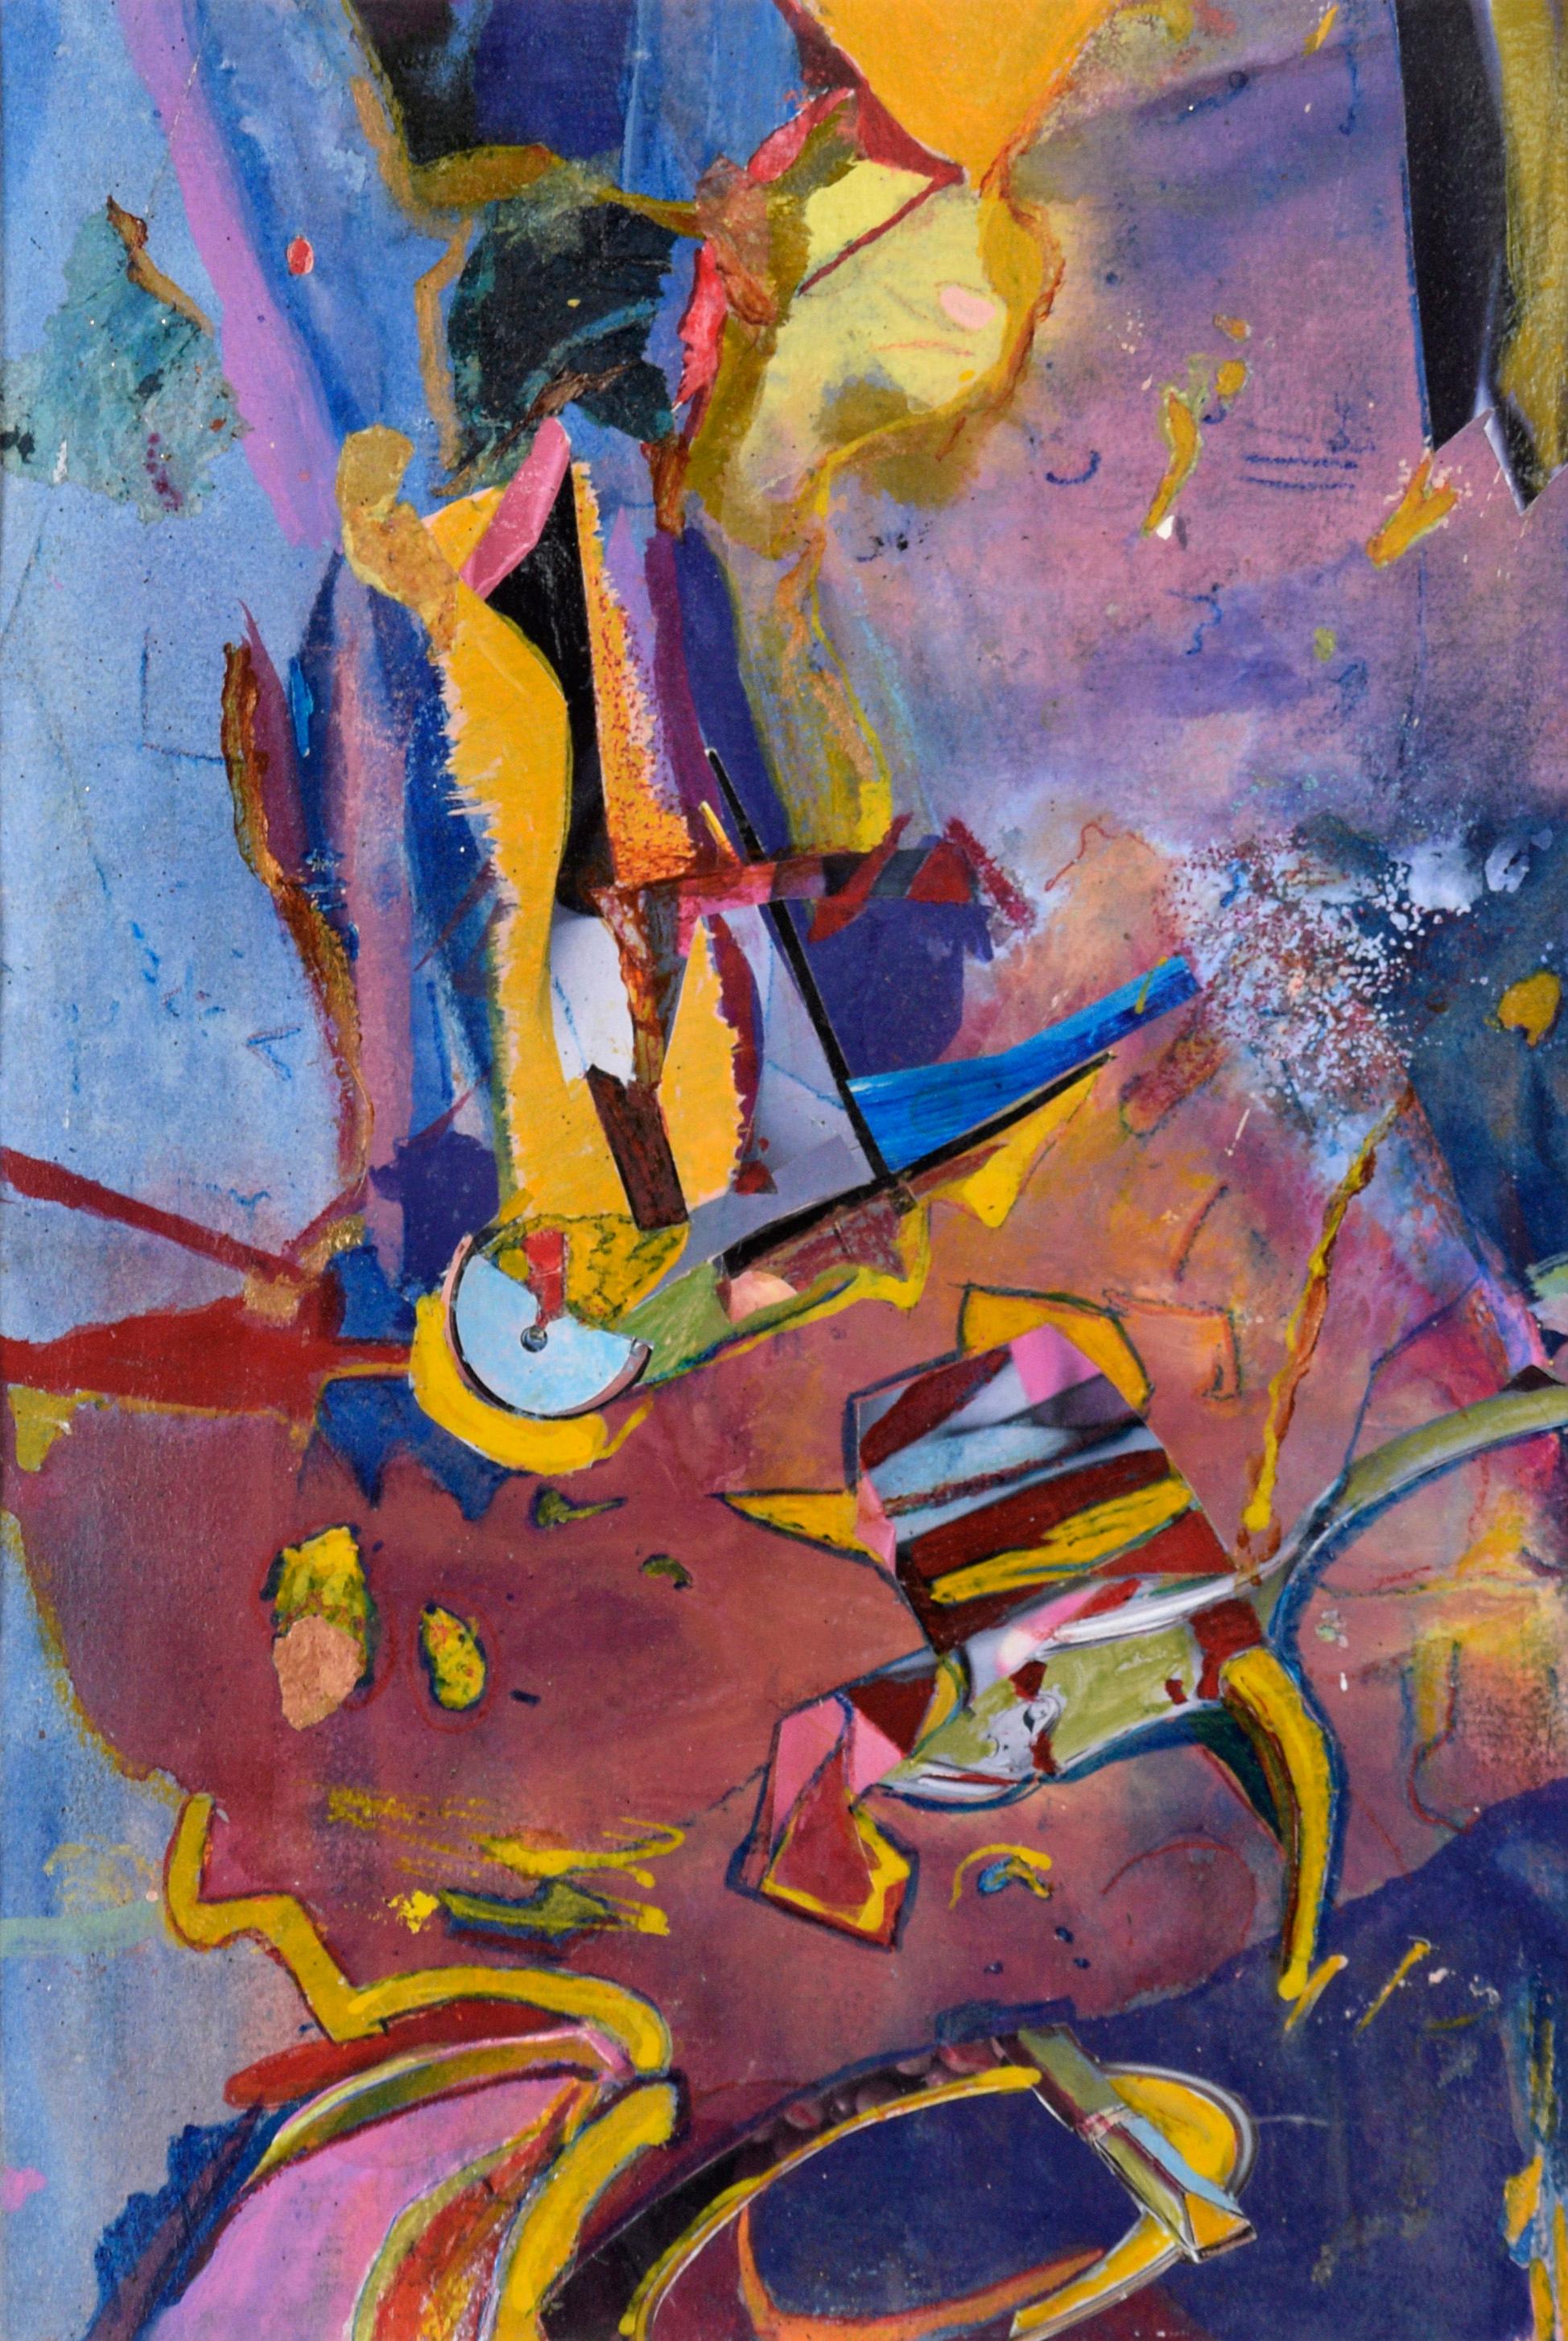 Carnival Abstract in Blue, Magenta, and Yellow - Oil and Collage on Paper - Painting by Jennie Rafton